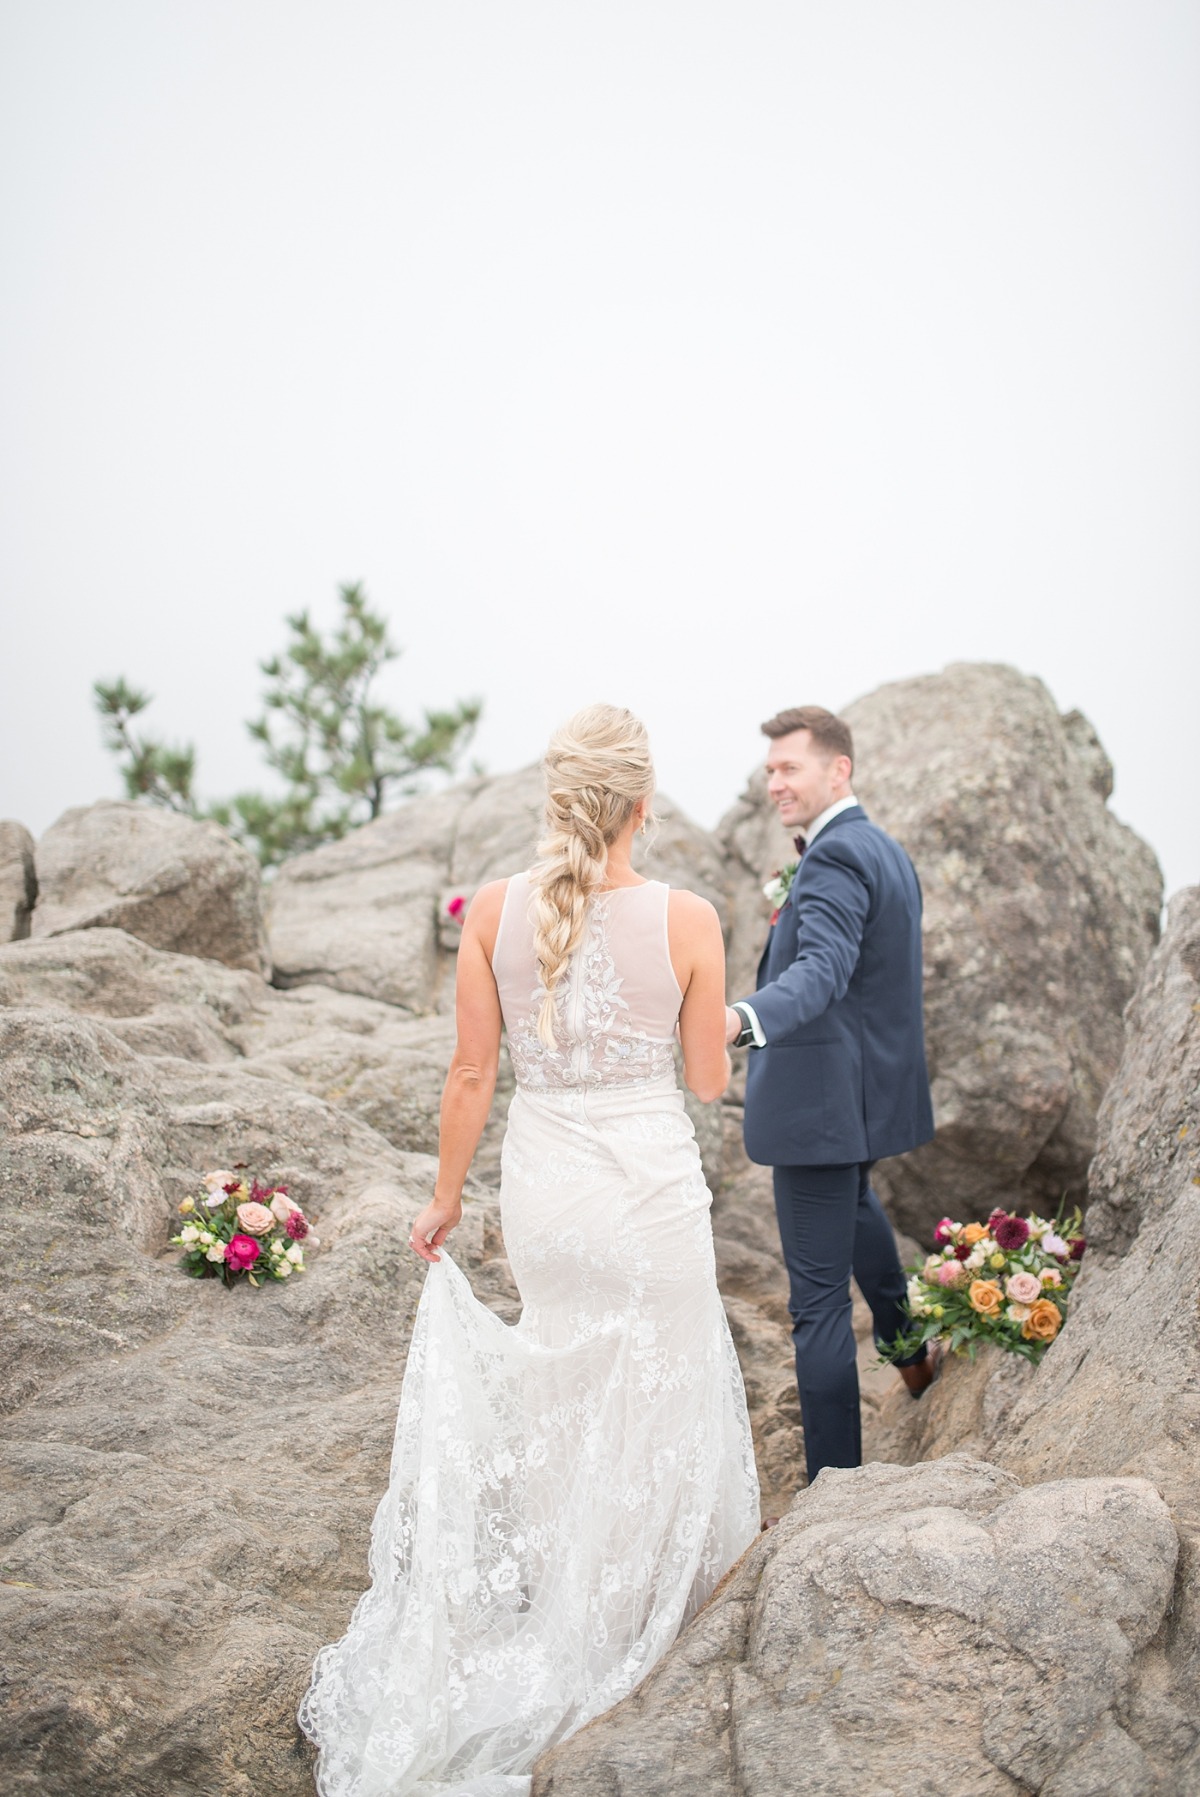 Get eloped in the mountains